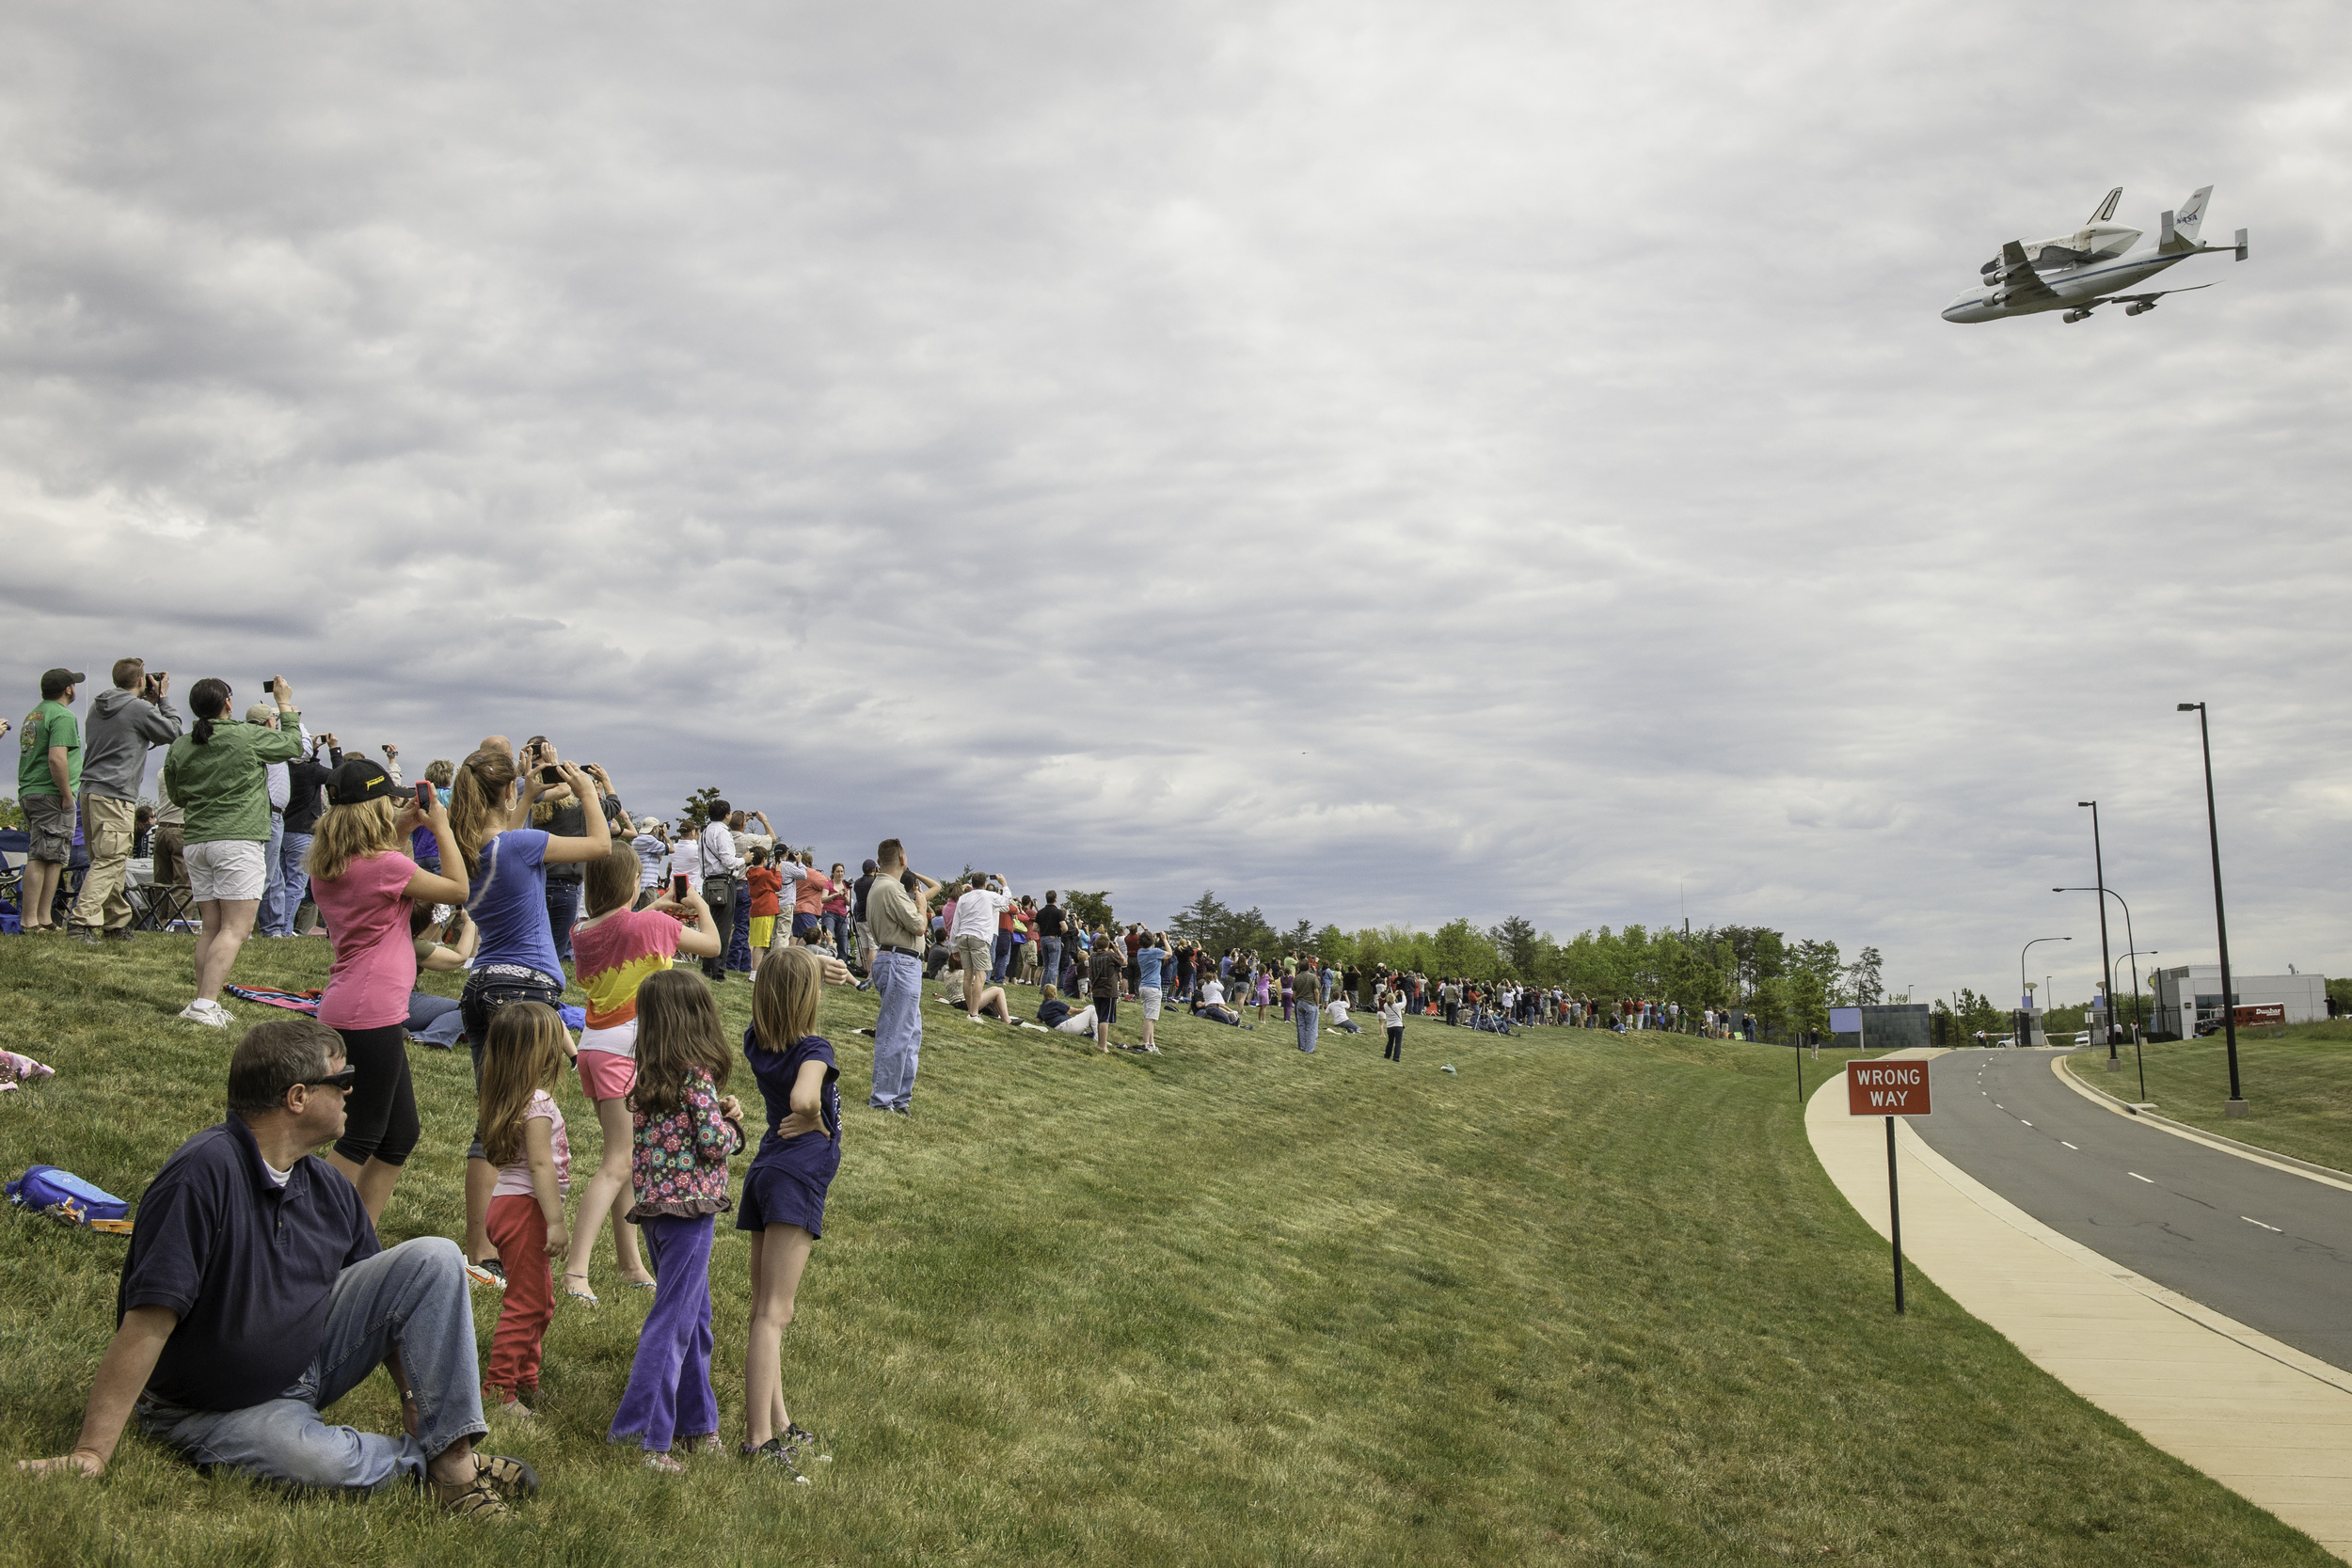  Spectators watch as space shuttle Discovery, mounted atop a NASA 747 Shuttle Carrier Aircraft (SCA) flies over the National Air and Space Museum’s Steven F. Udvar-Hazy Center, Tuesday, April 17, 2012, in Chantilly, Va. Discovery, the first orbiter r